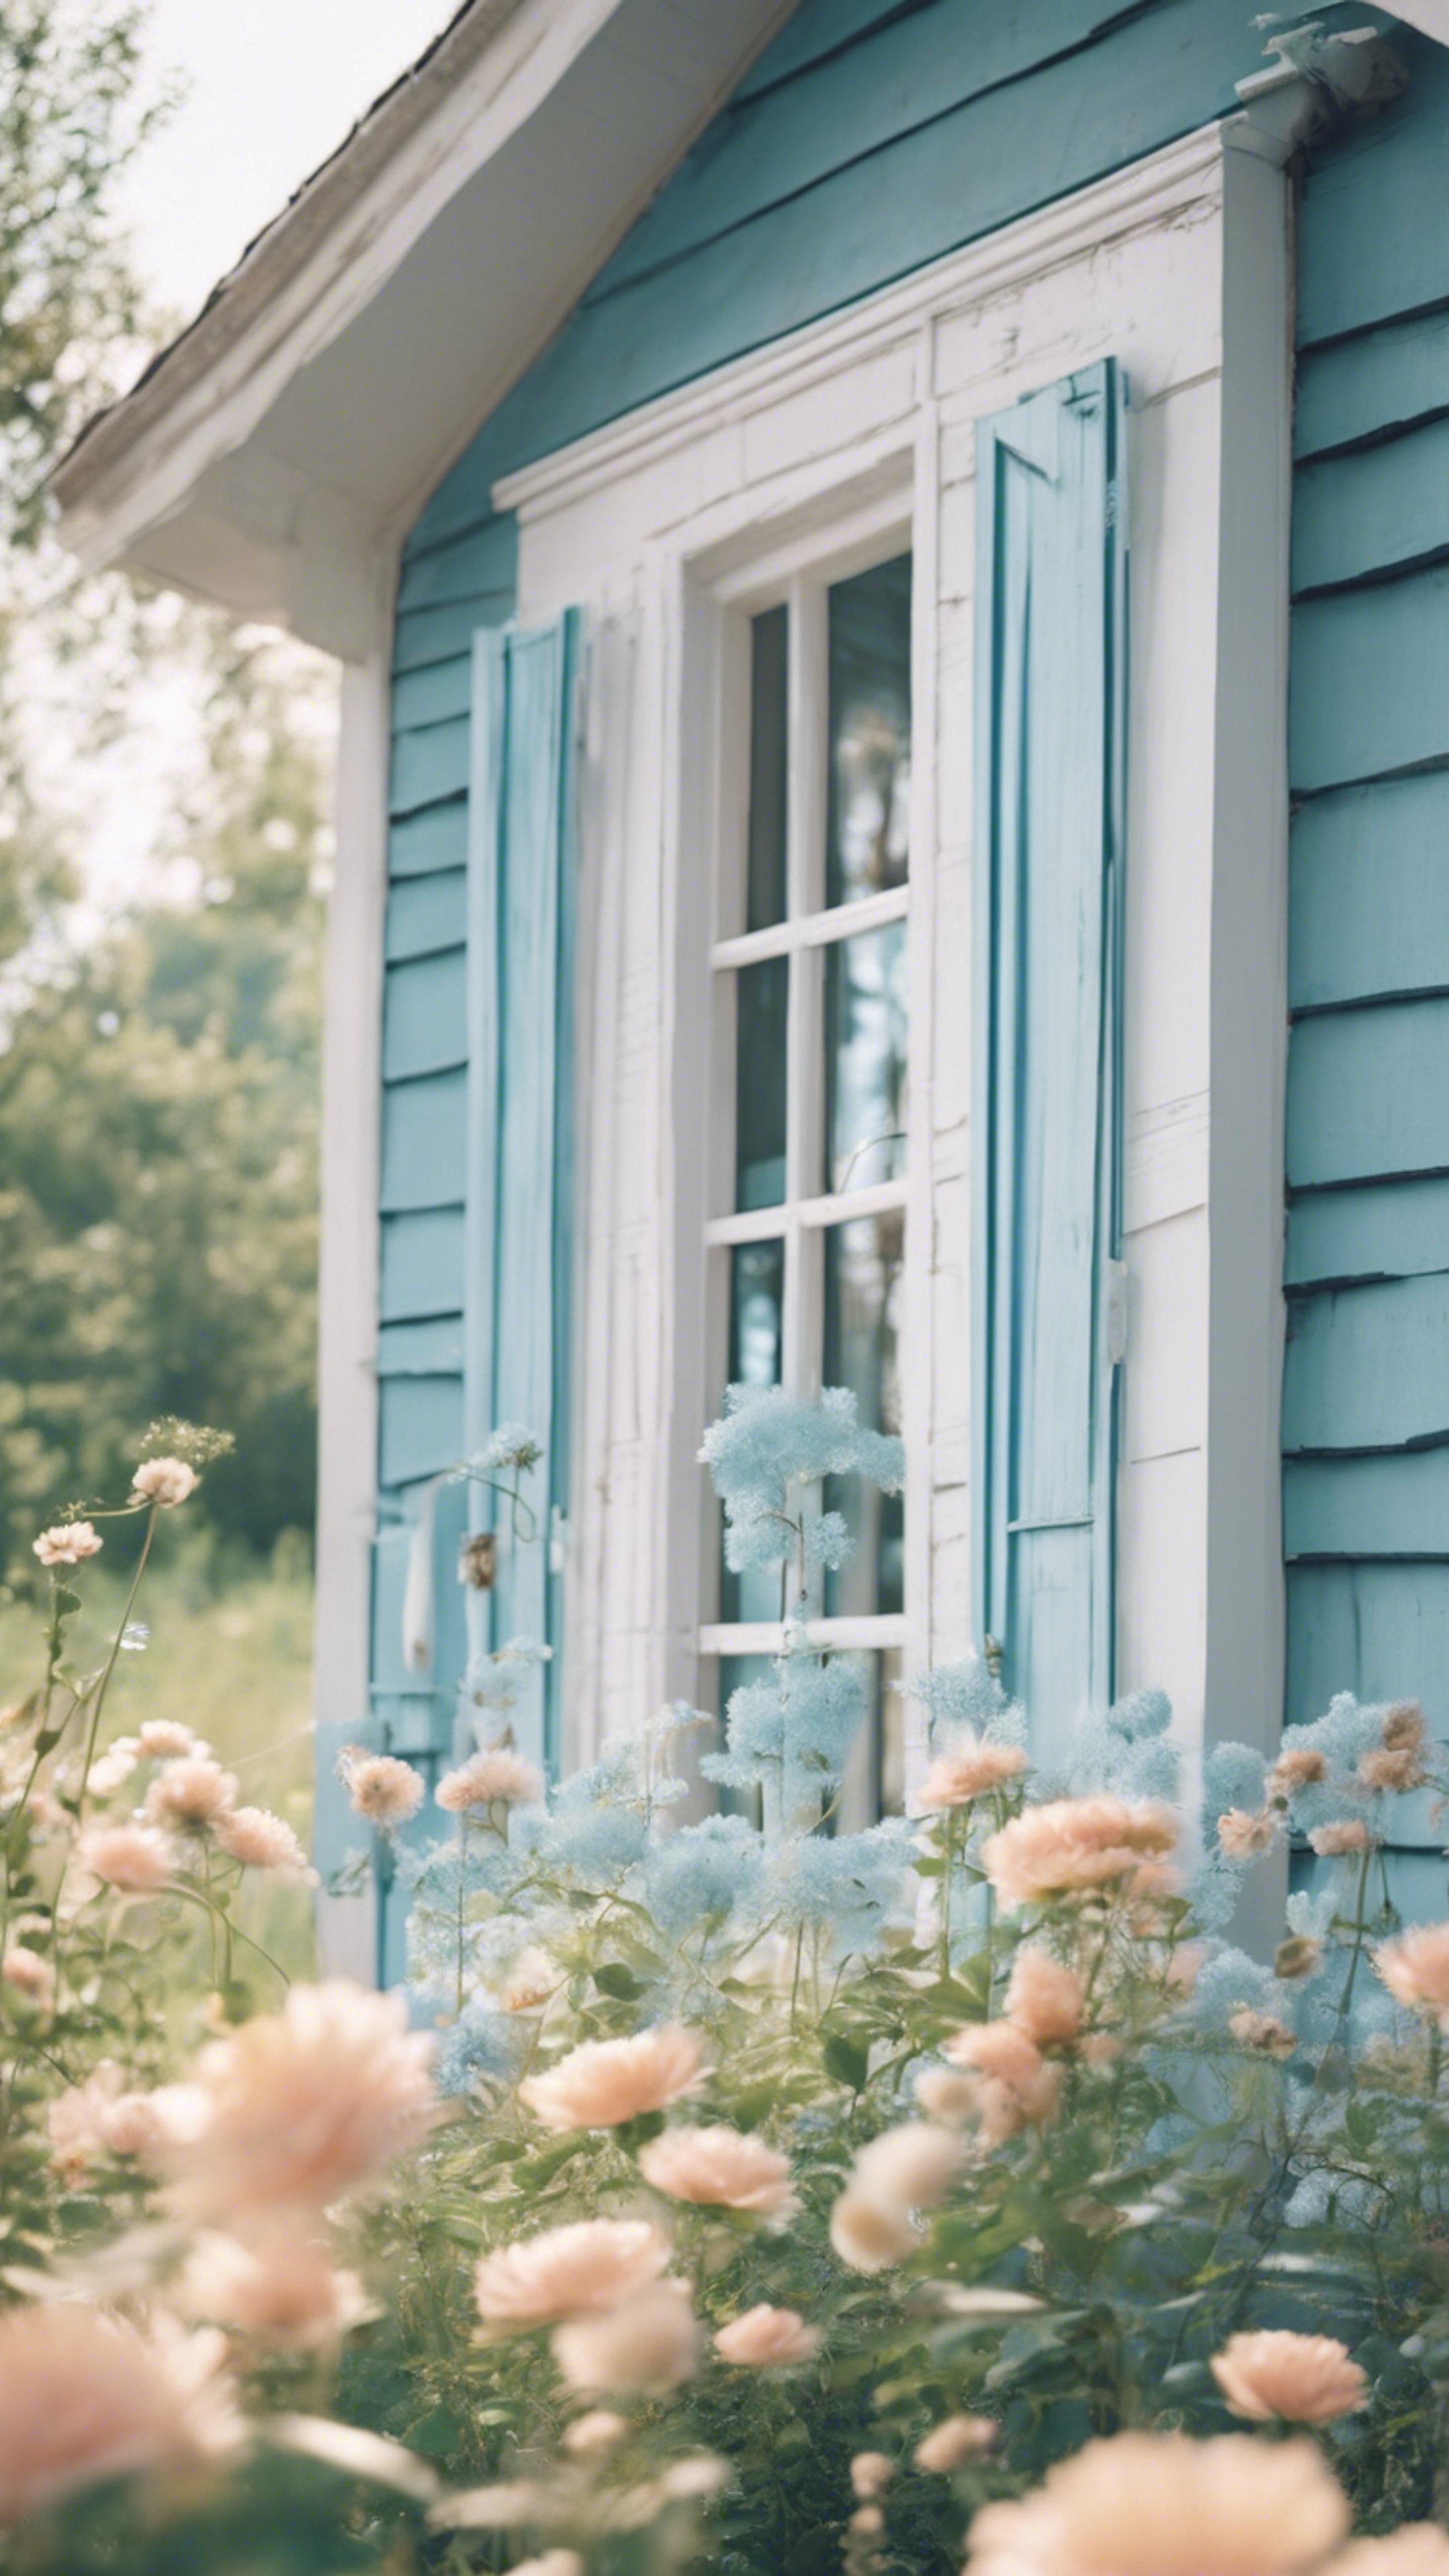 Preppy pastel blue summer farmhouse with white wooden windows.壁紙[48dc49ad1a9b4a7c9166]